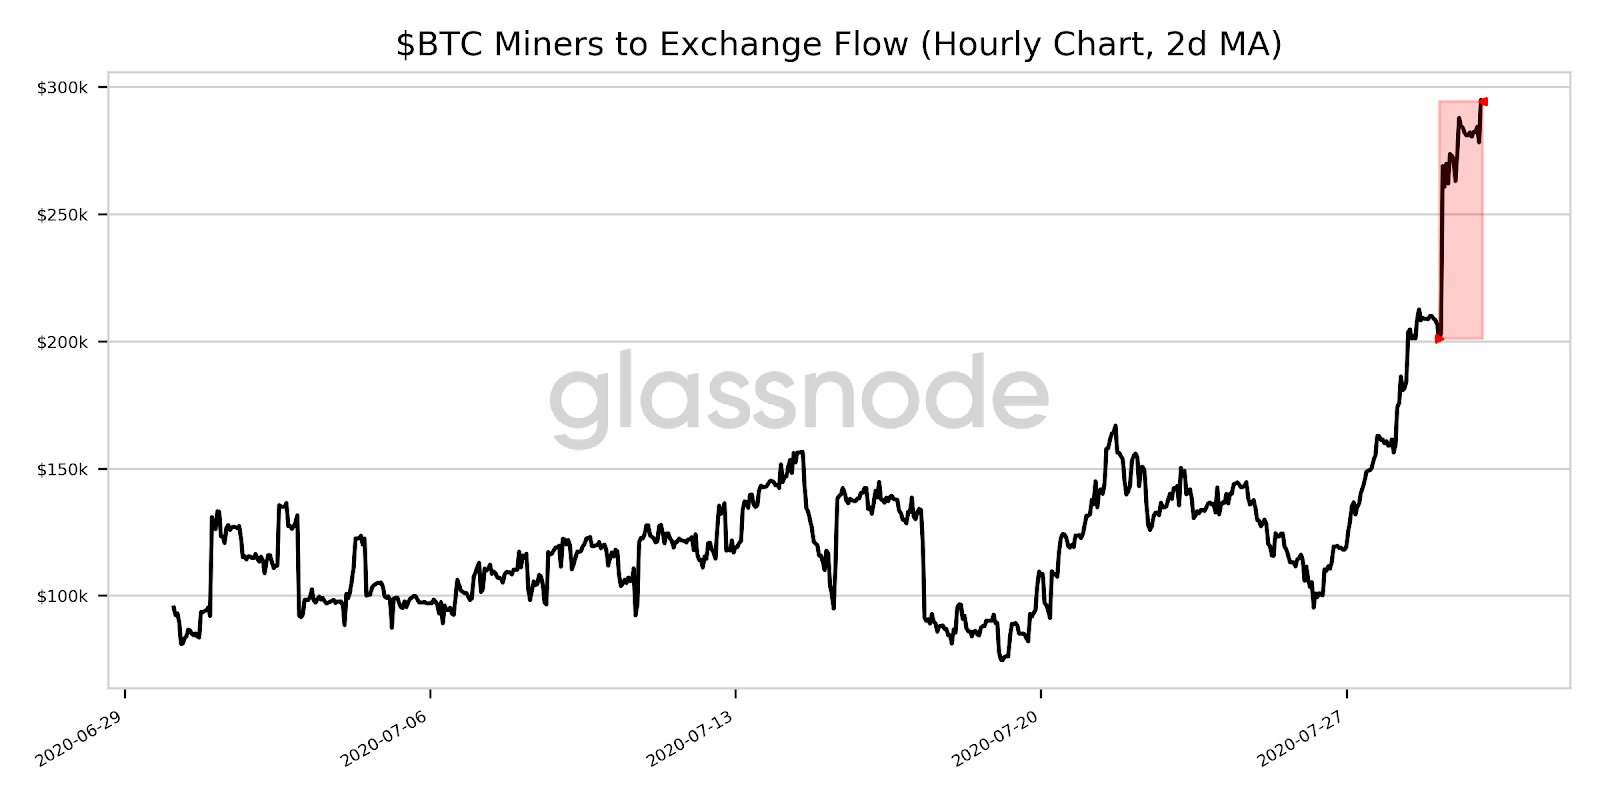 Bitcoin miners to exchange flow rise by 46.5%